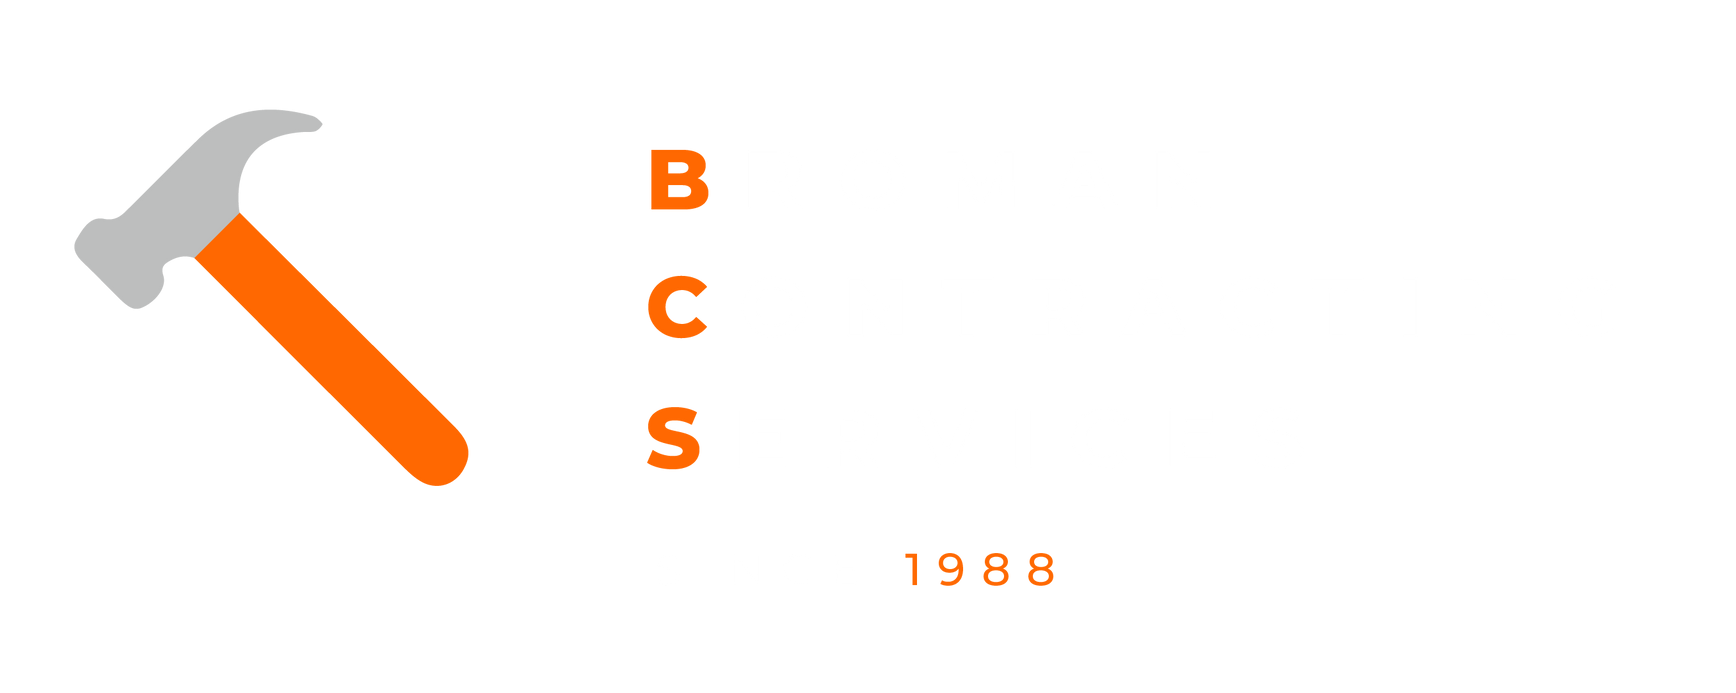 Broman Contracting Services business logo, exterior home renovations since 1988, window replacement midlothian va, vinyl siding midlothian va, exterior doors richmond va